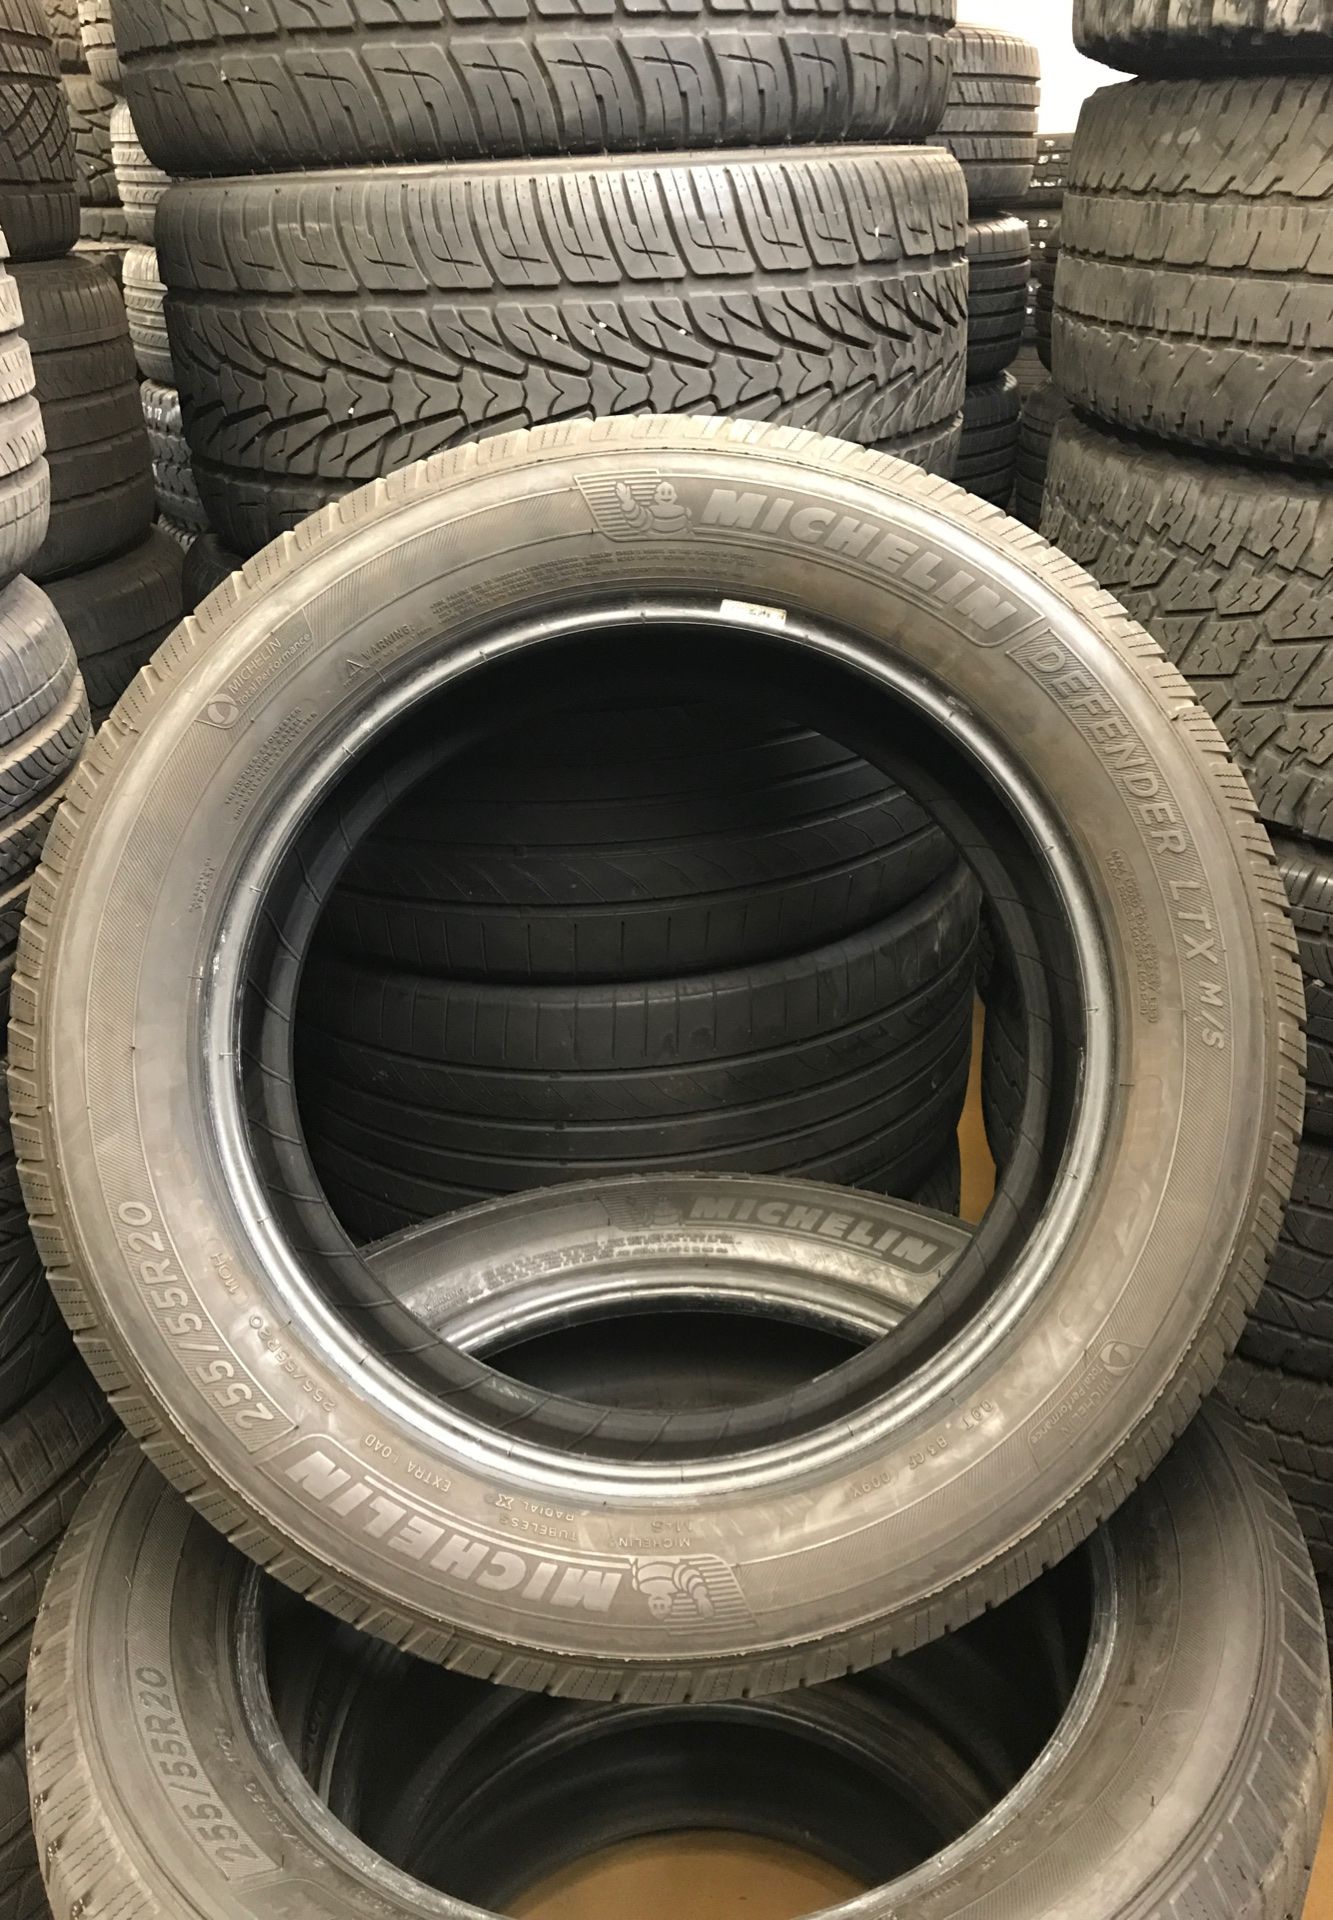 Pair of 255/55 R20 Michelin’s for $200